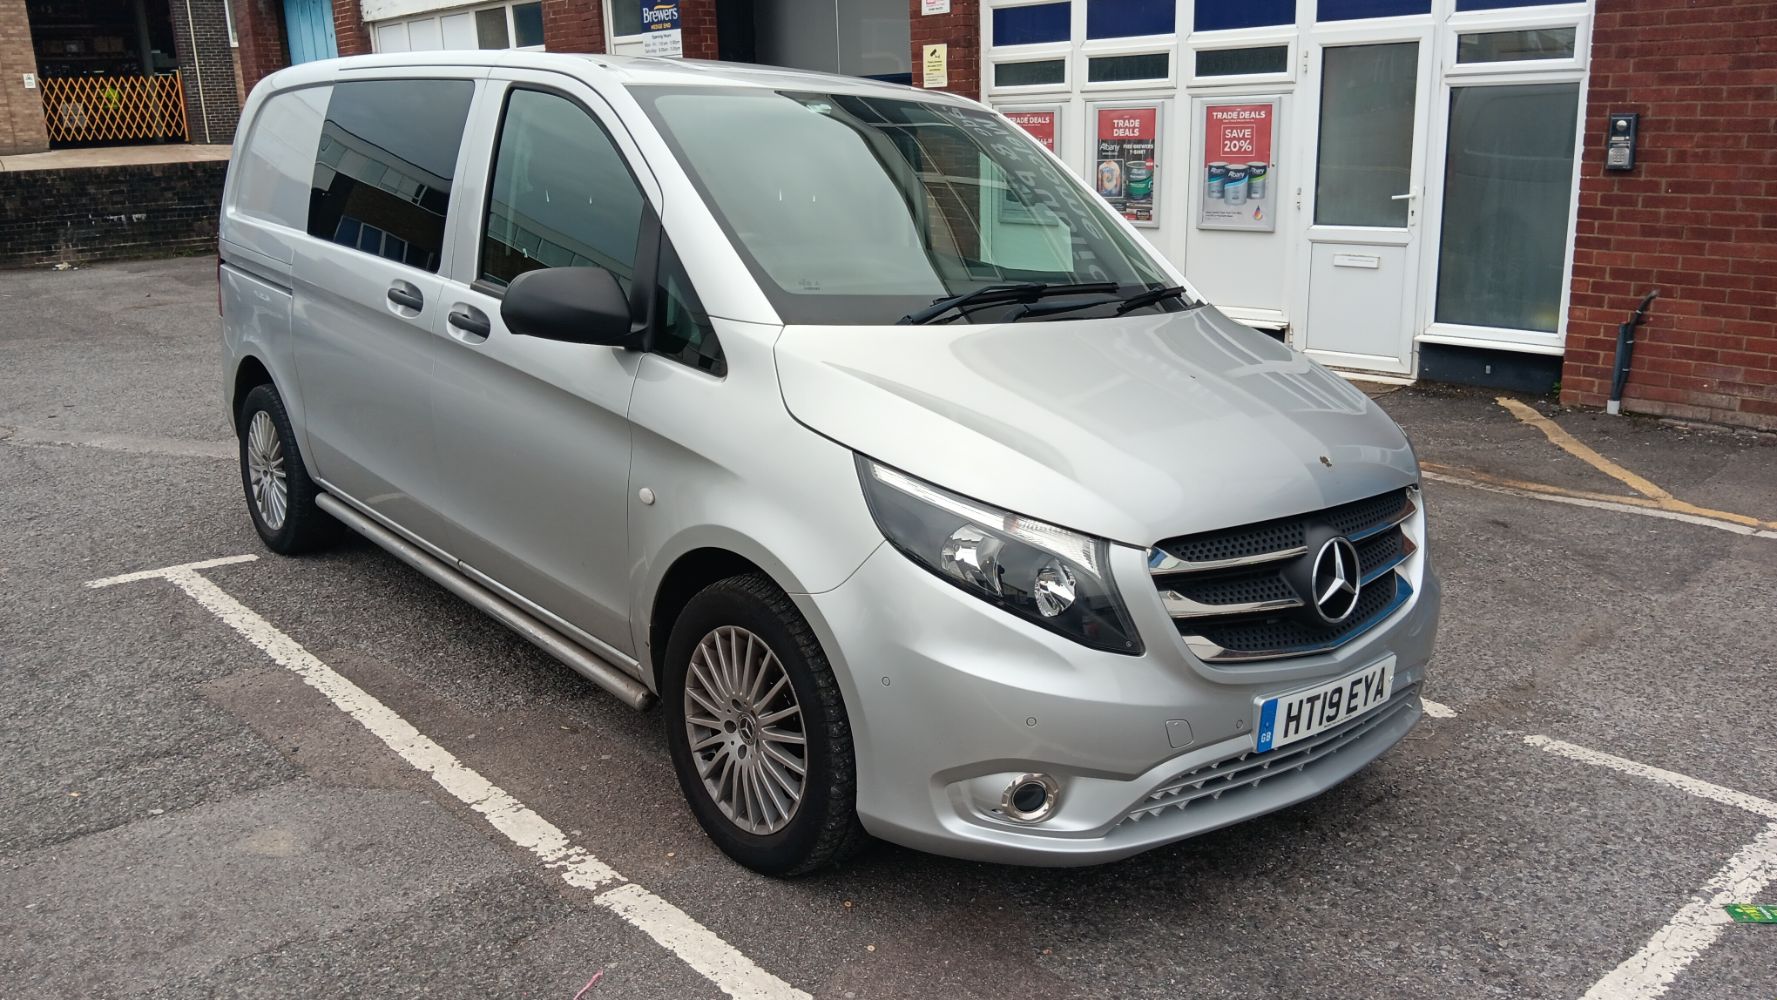 Assets of a Graphics Design & Sign Makers to include; 2019 Mercedes Benz Vito, Peugeot Boxer Professional Van, Laminating & Engraving Machinery